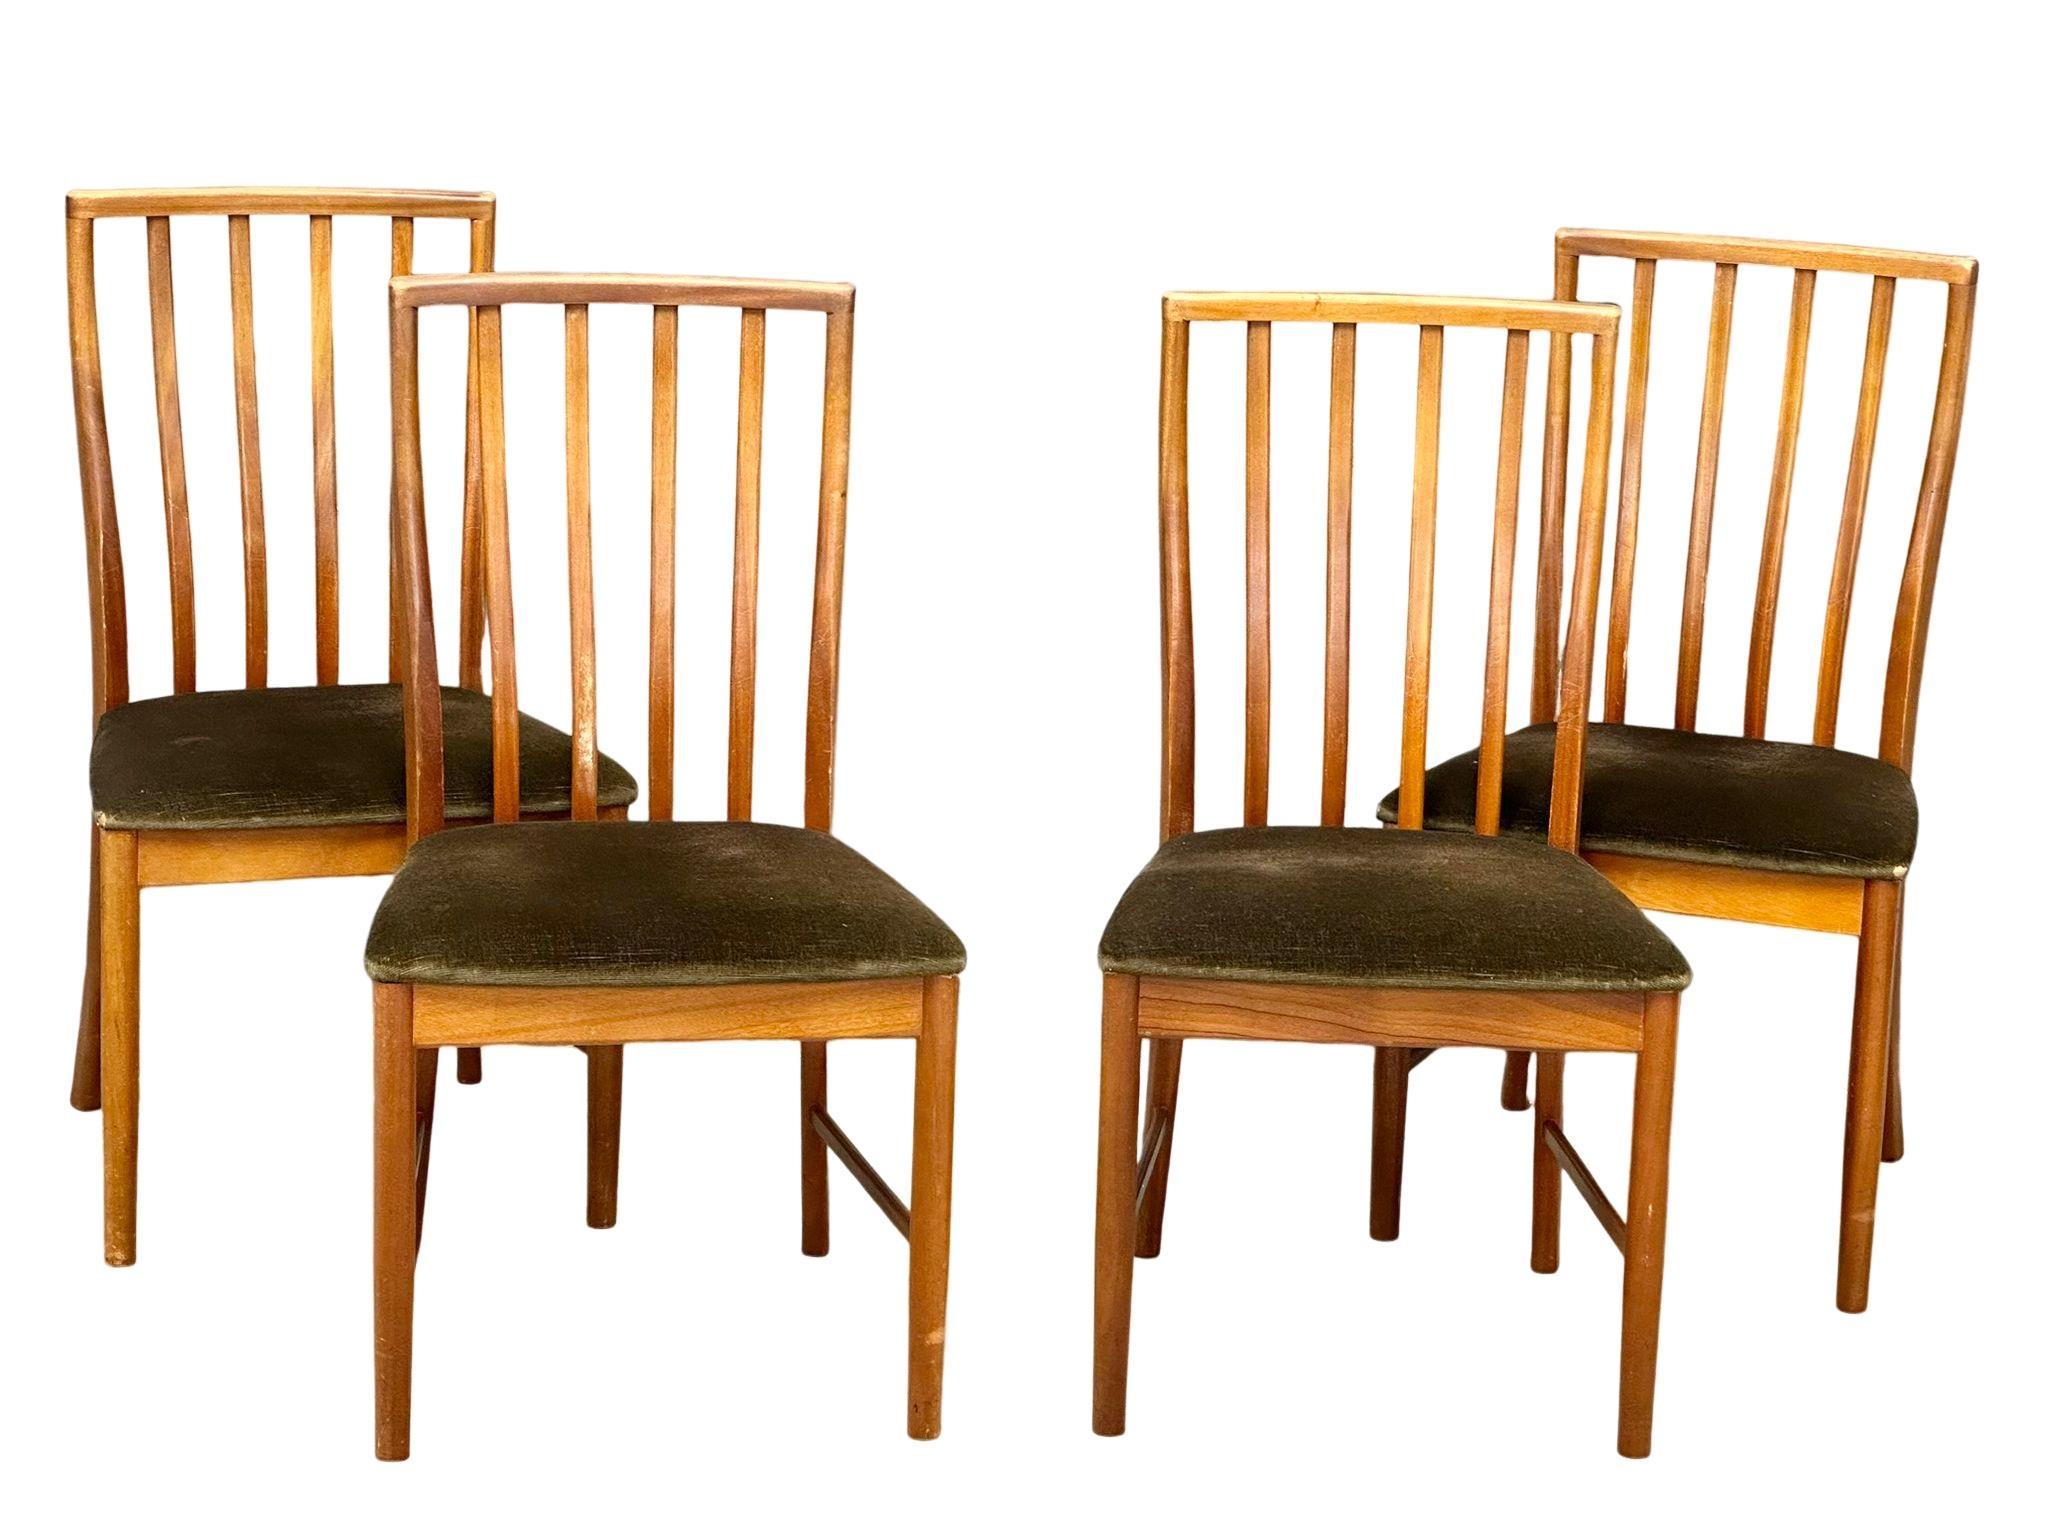 A set of 4 McIntosh Mid Century teak dining chairs designed by Tom Robertson, 1960s.